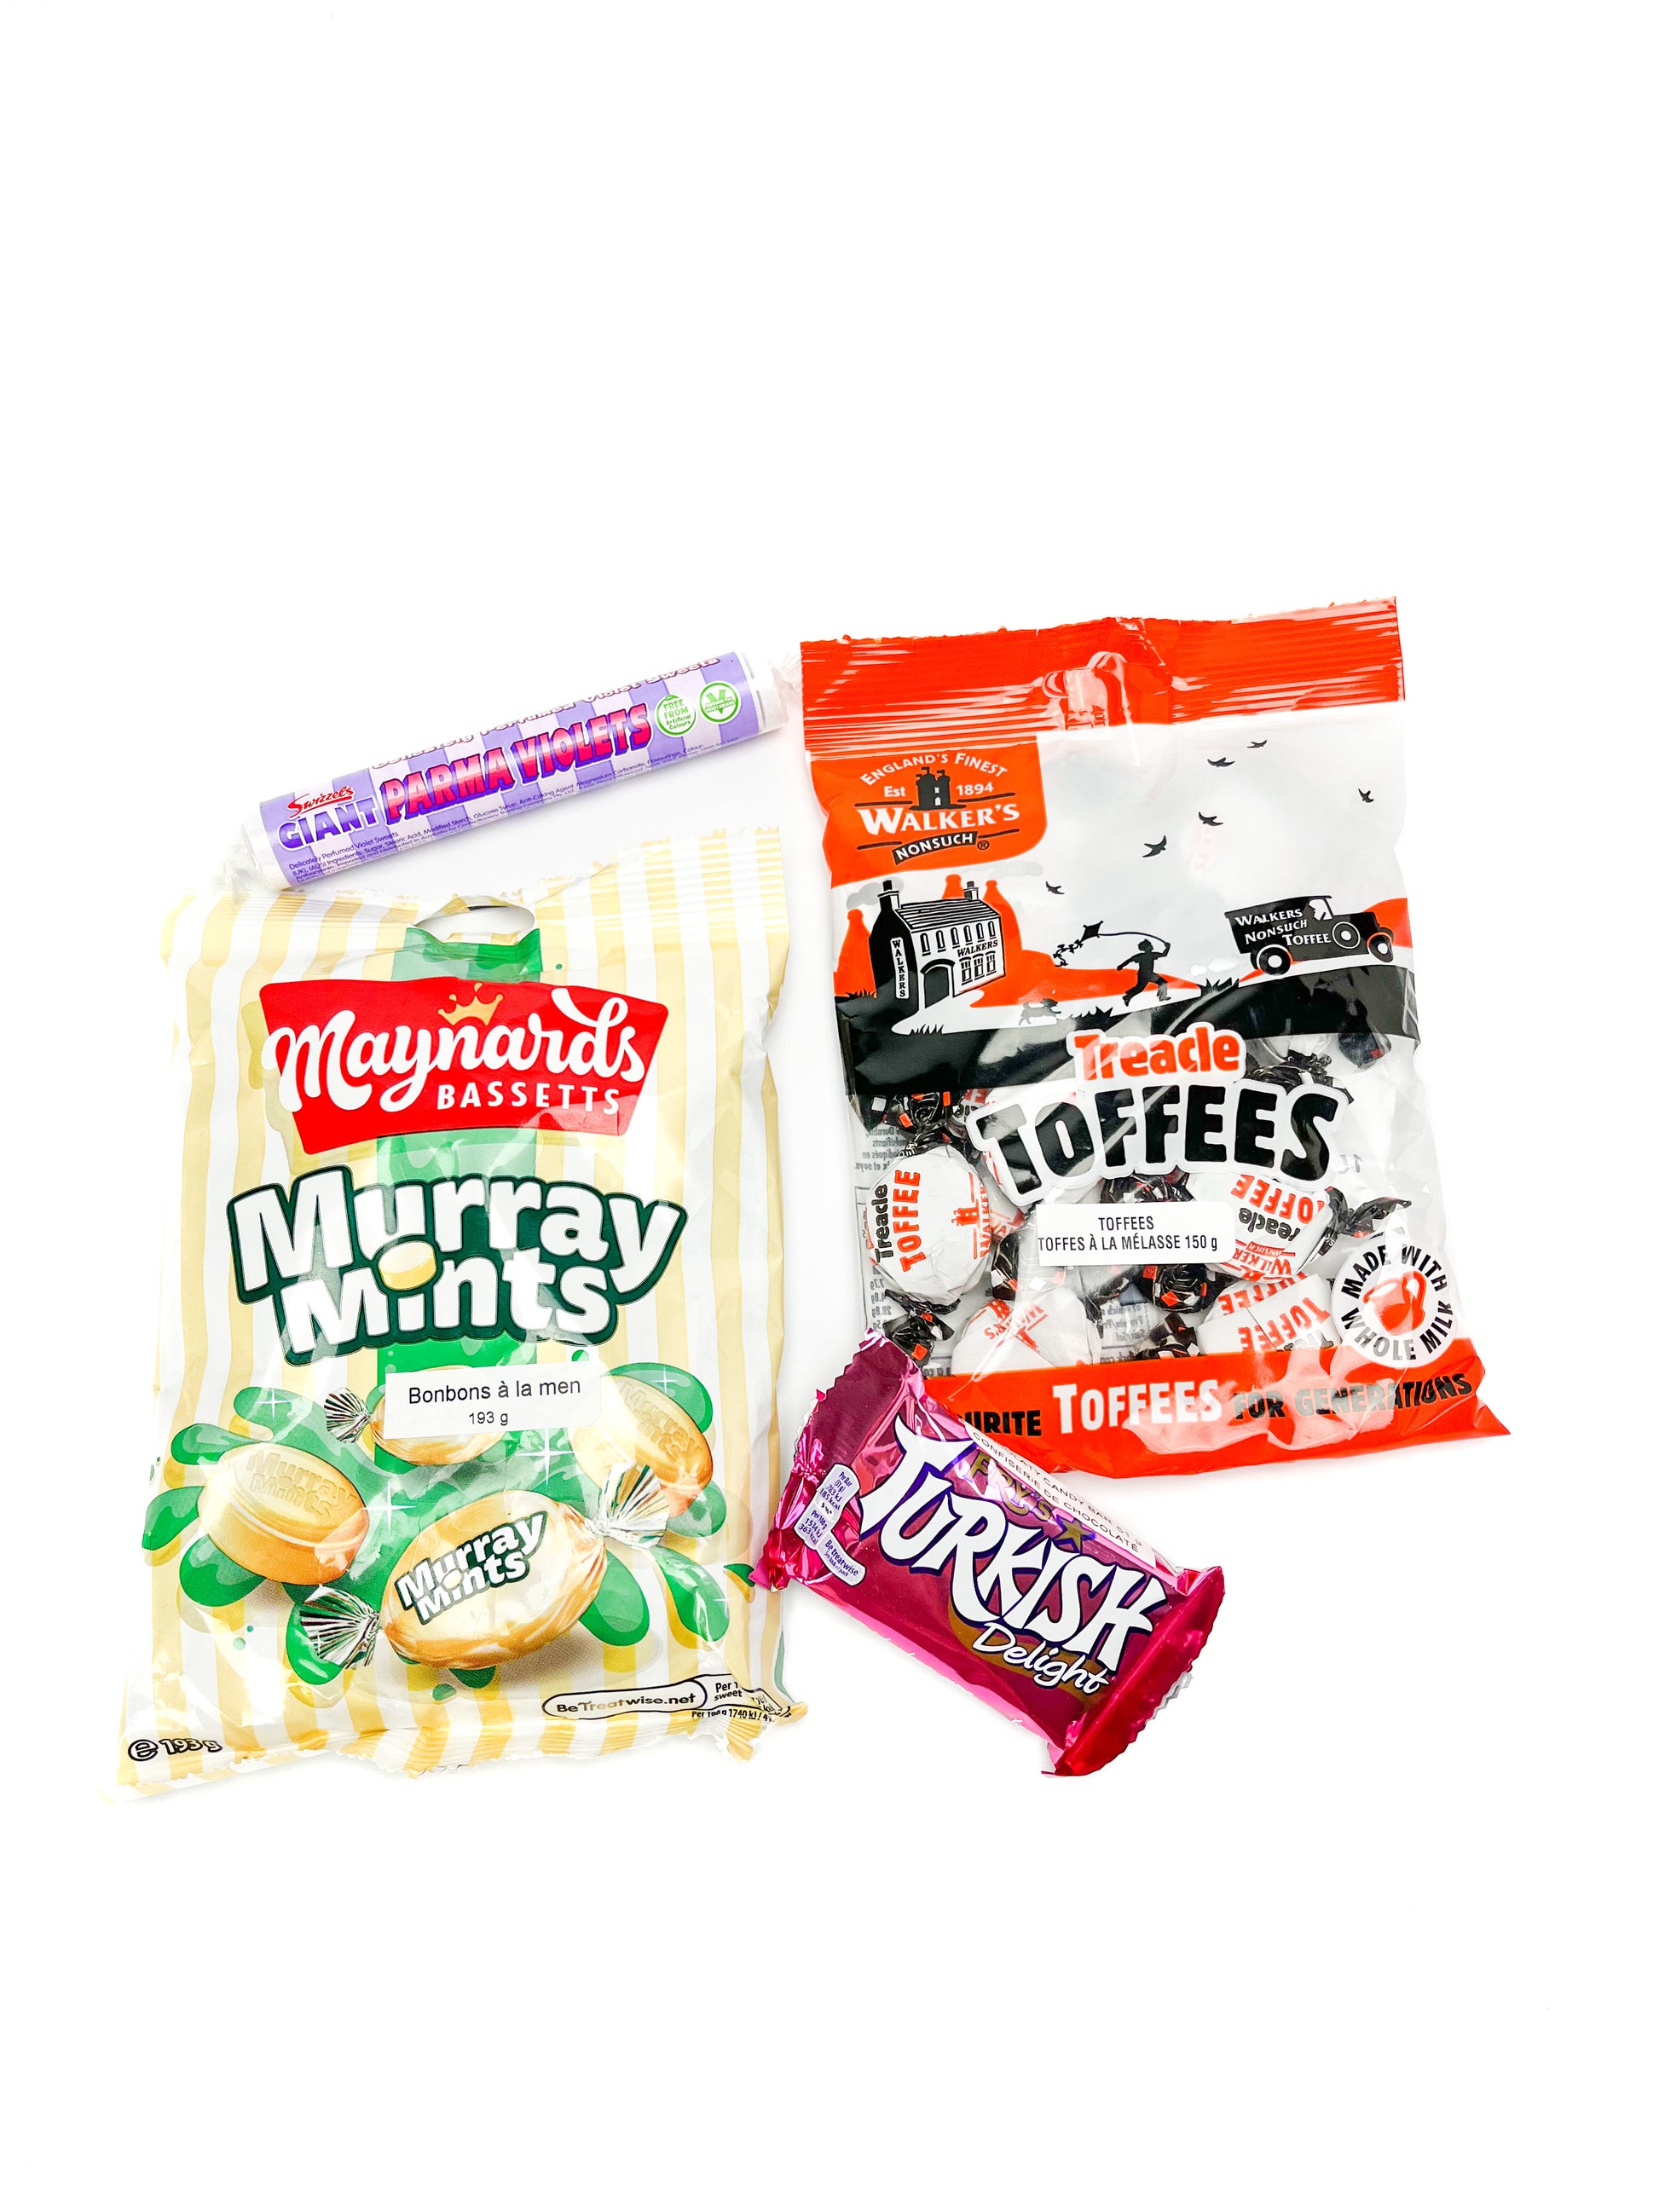 A package of maynards murray mints, treacle toffeess, parma violets, and a turkish delight bar displayed on a white background.